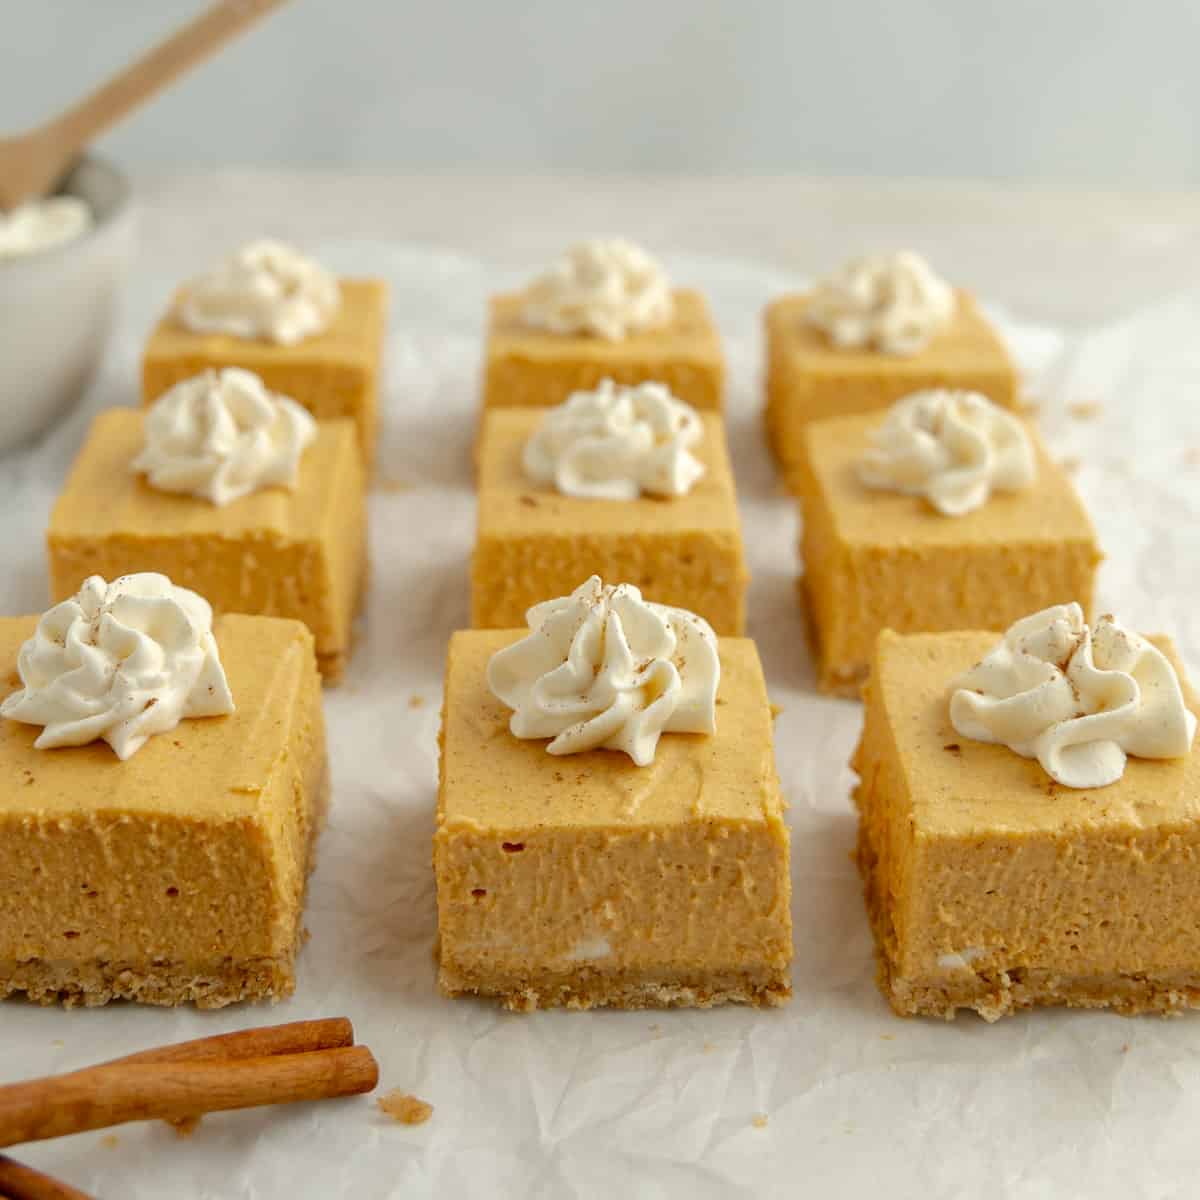 A group of pumpkin cheesecake squares topped with whipped cream. Cinnamon sticks on the side.